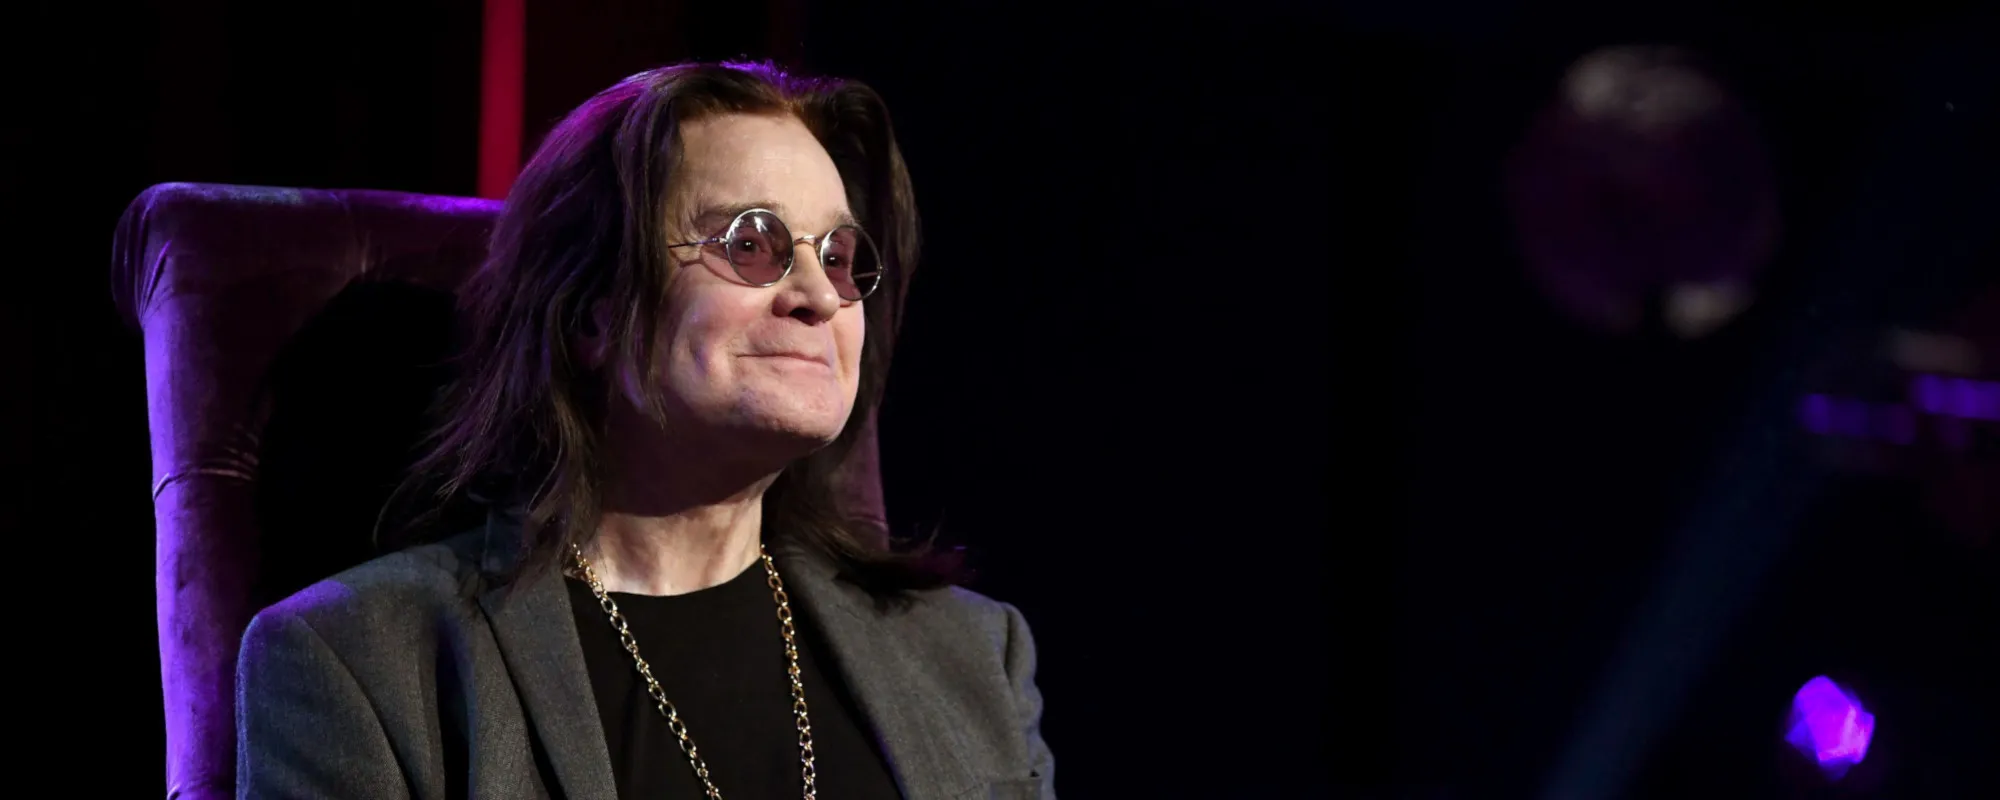 Sharon Osbourne Says Ozzy is “On the Road to Recovery” Following Spinal Operation